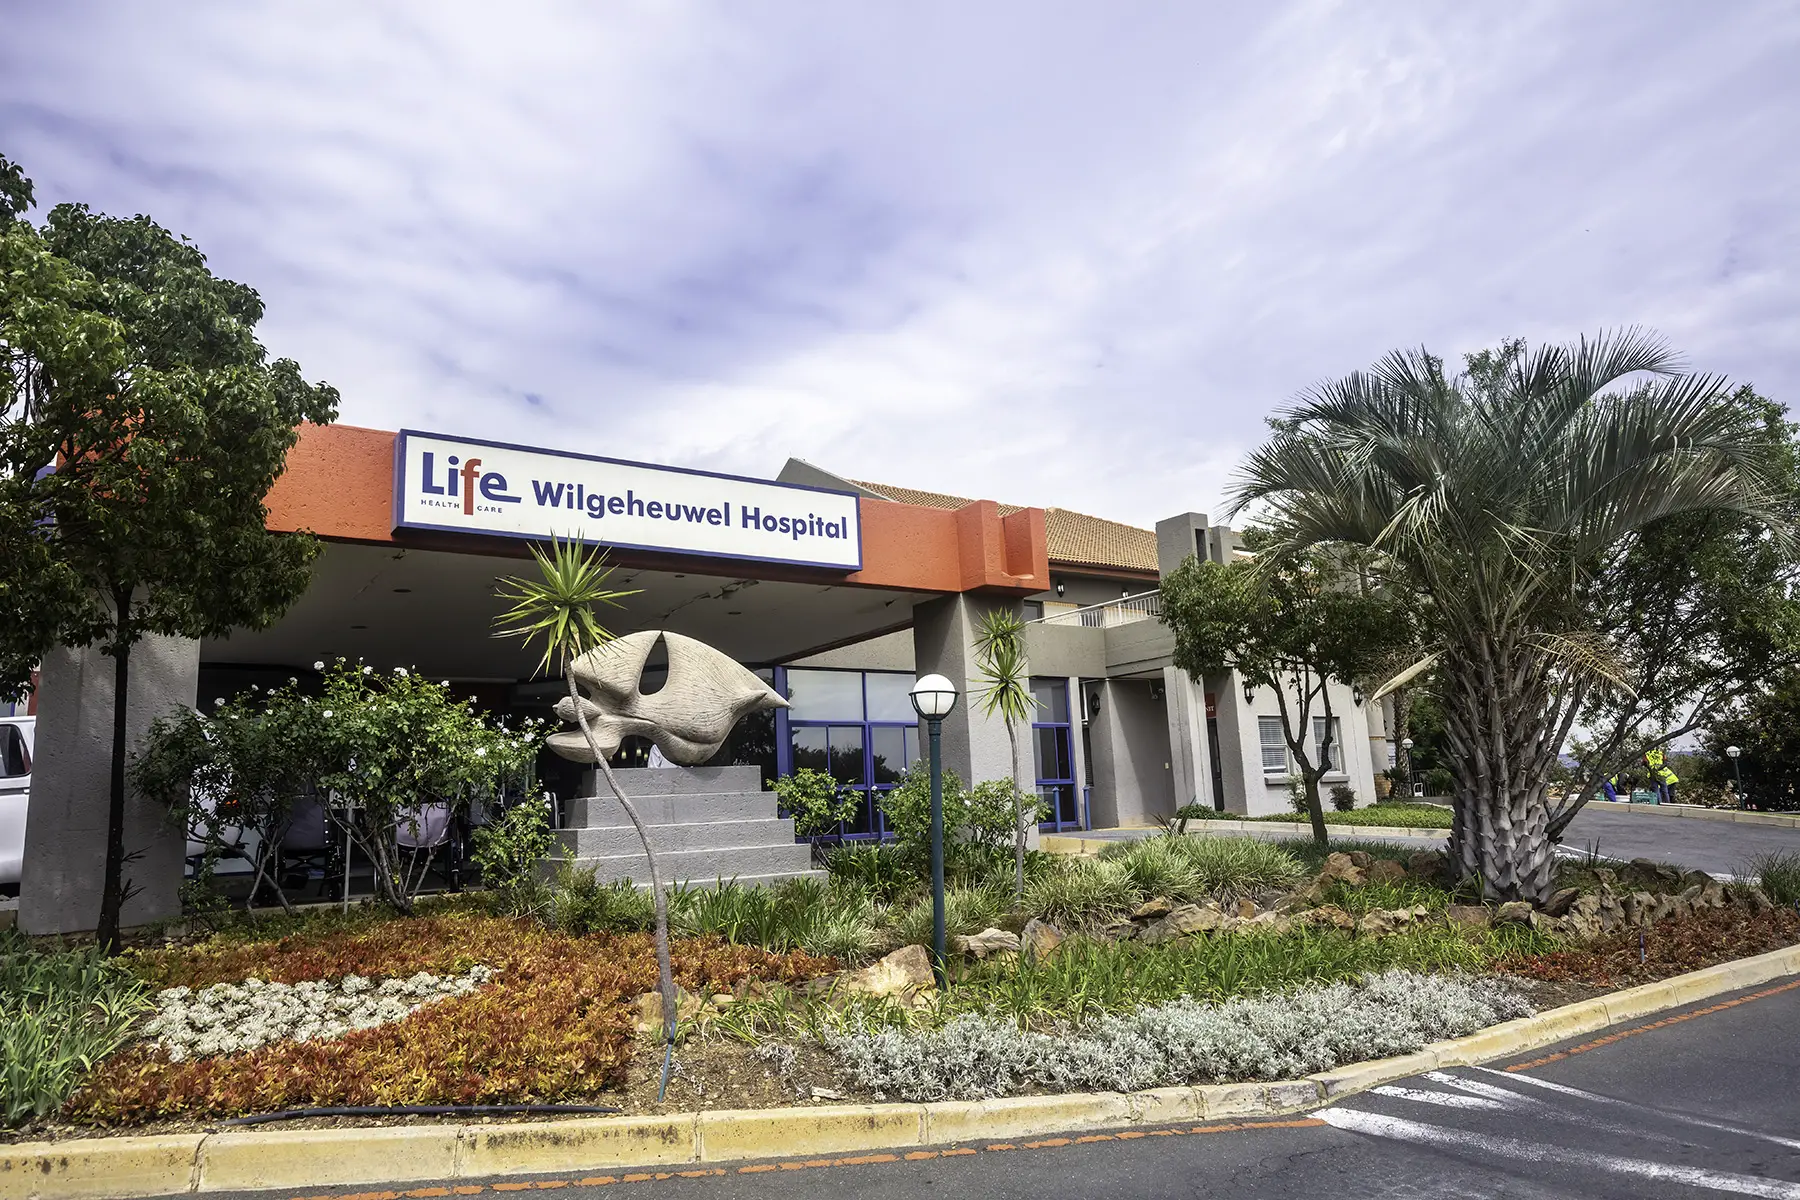 Life Wilgeheuwel Hospital is a private hospital in Johannesburg